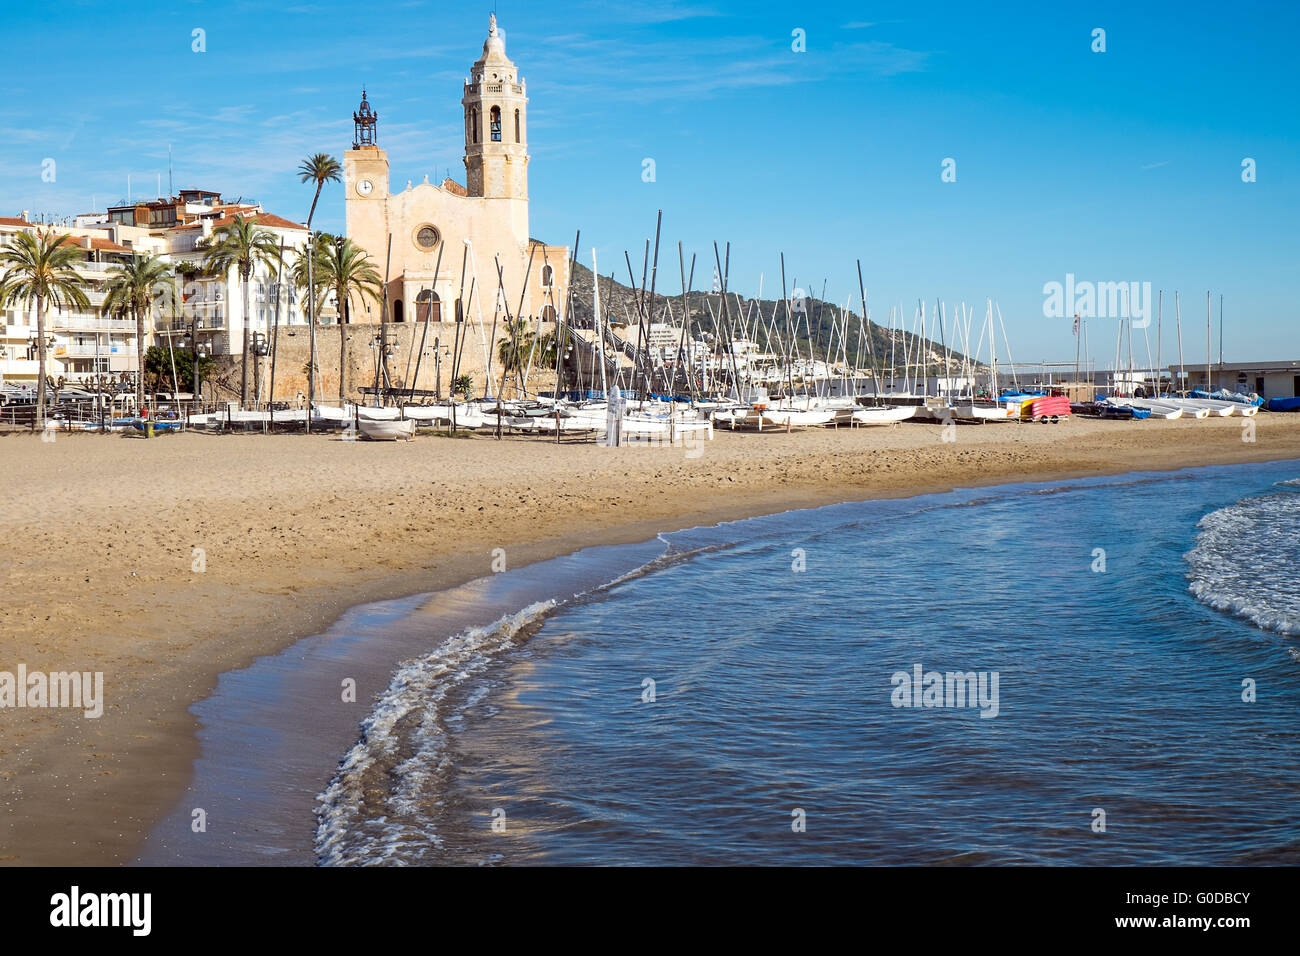 The church and the beach in Sitges, a small town n Stock Photo